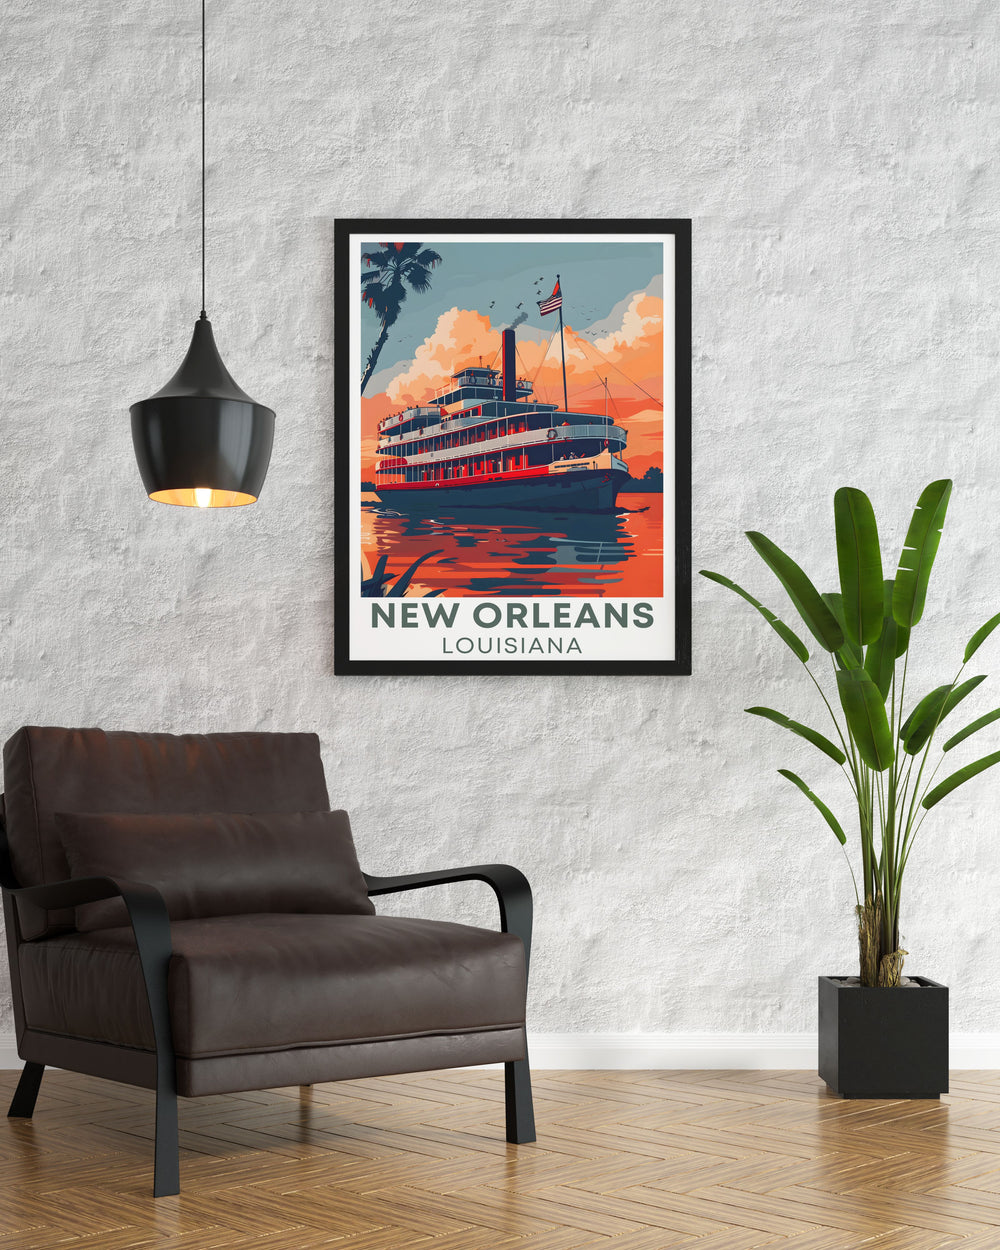 Elegant Steamboat Natchez poster featuring the iconic steamboat sailing the Mississippi River ideal for New Orleans enthusiasts and lovers of Louisiana art making a timeless addition to any wall or as a special gift